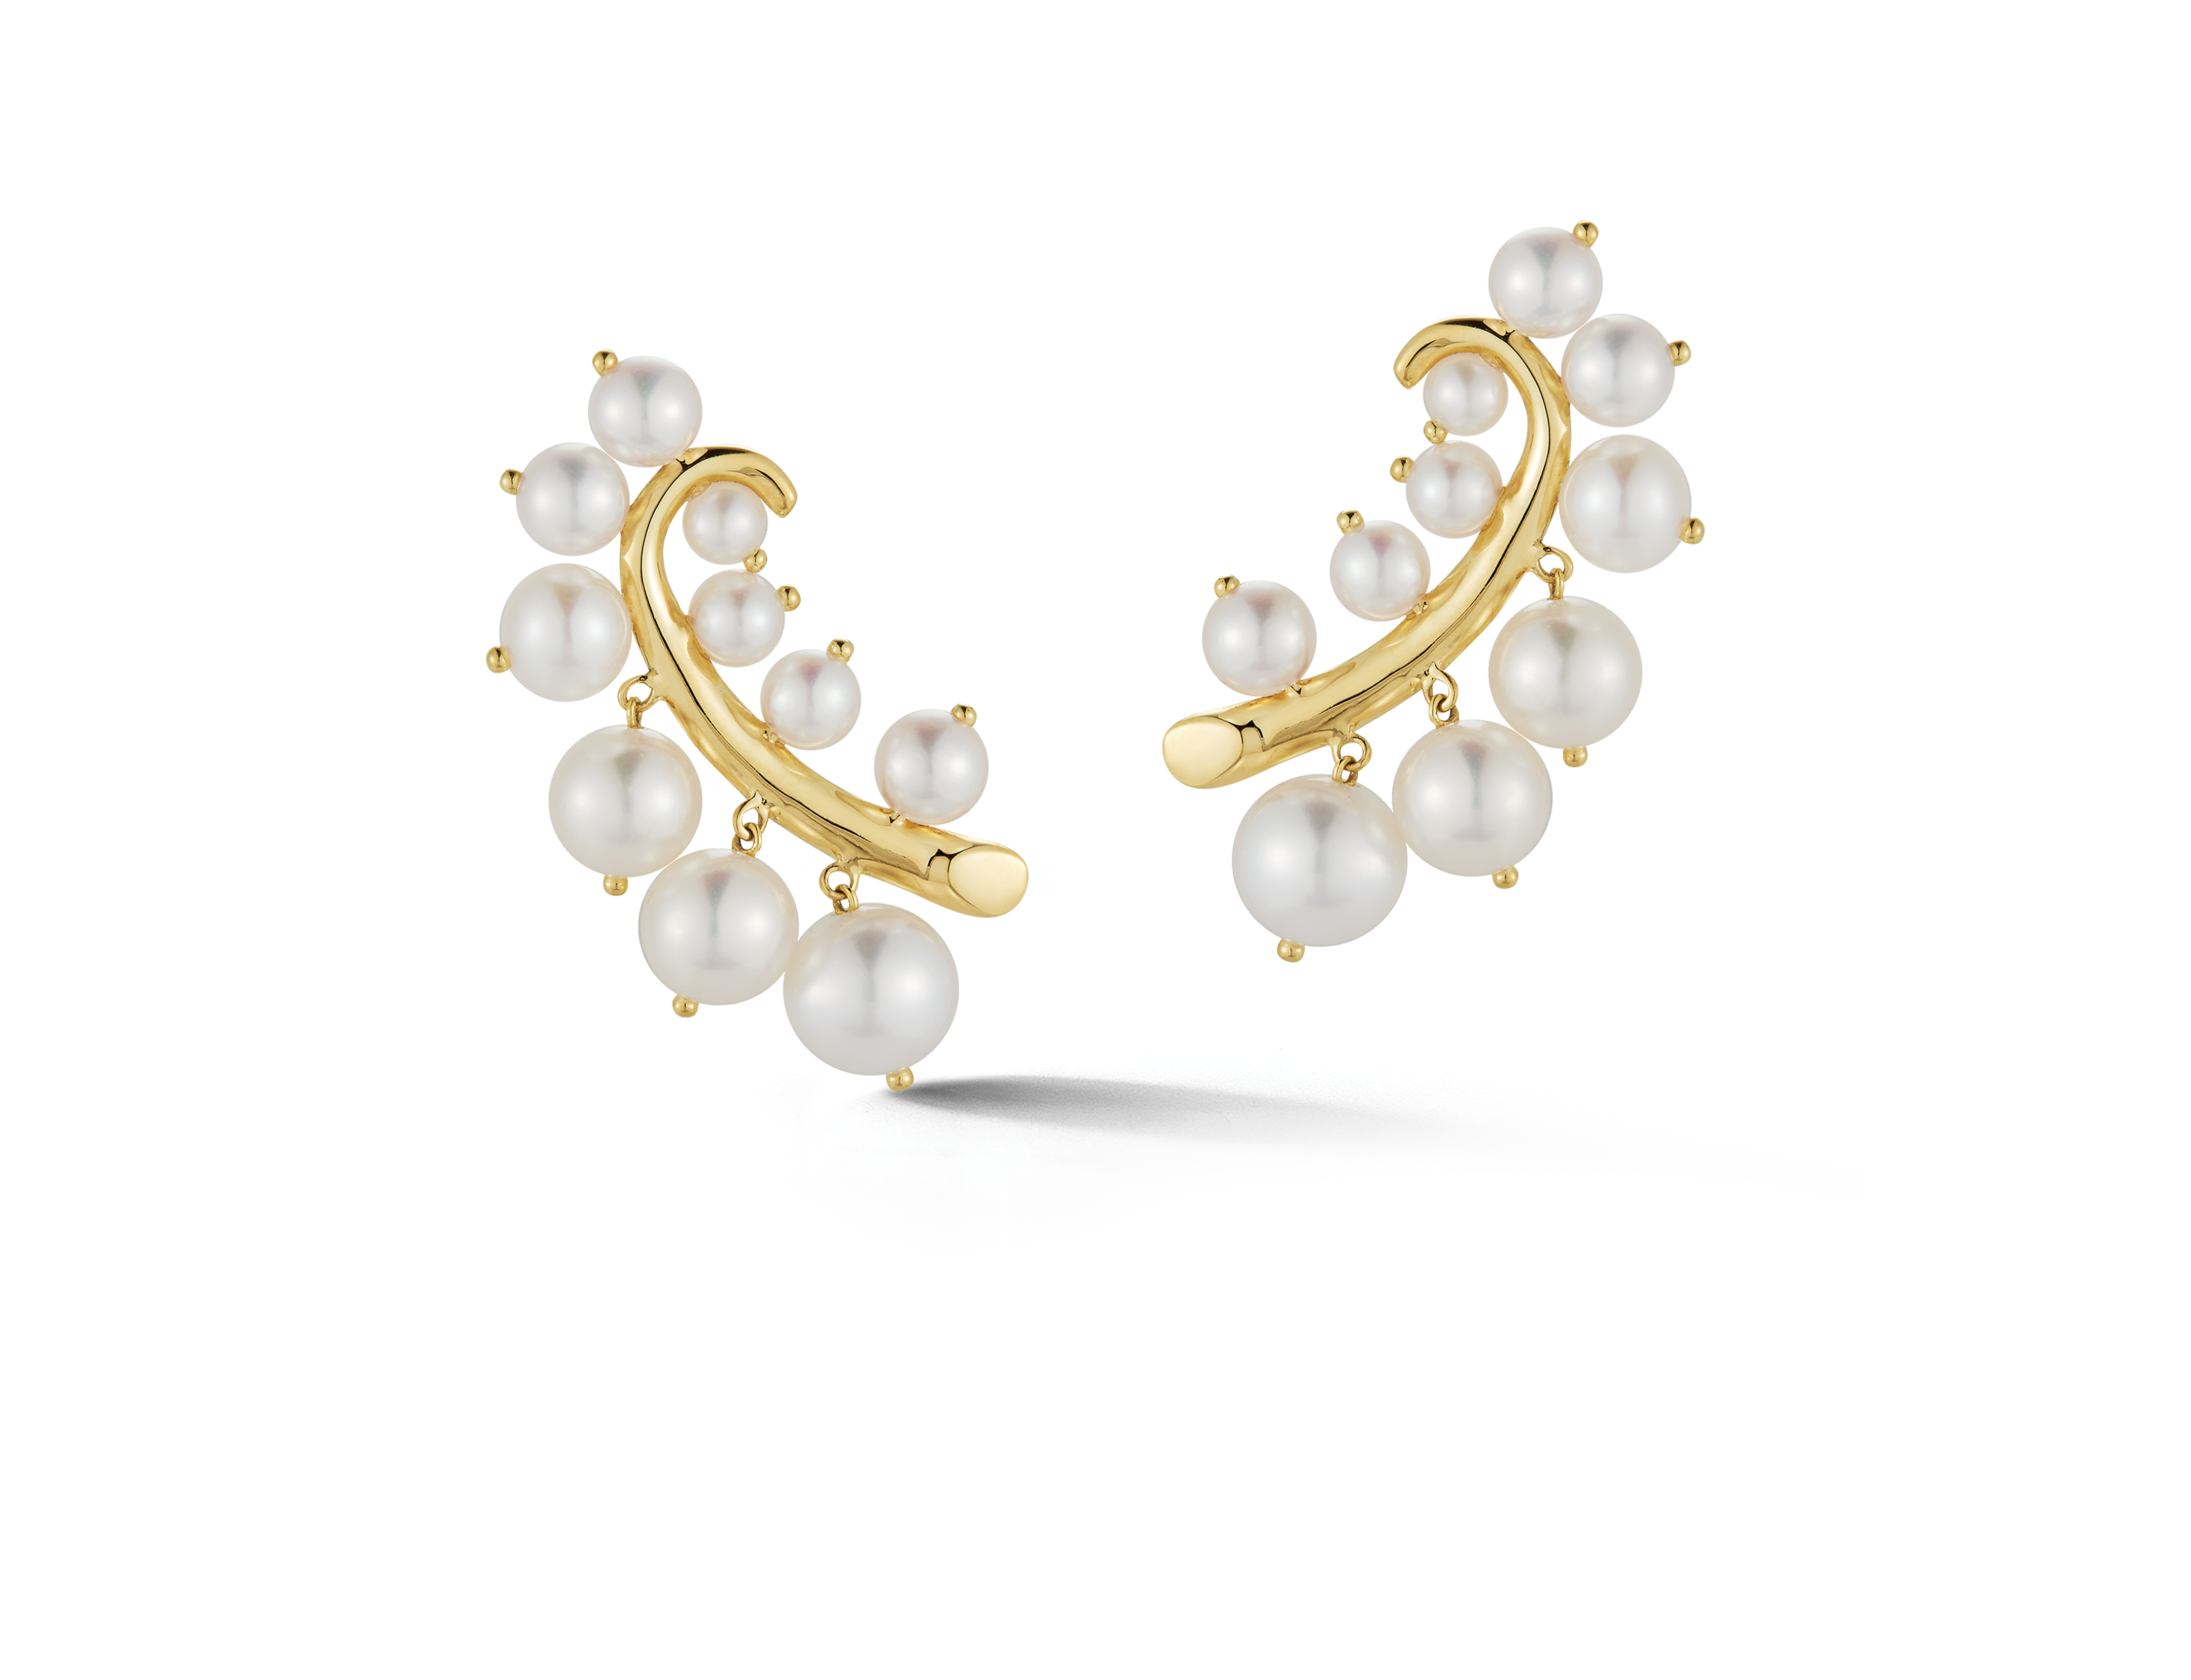 Lily of the Valley Earrings in Pearl